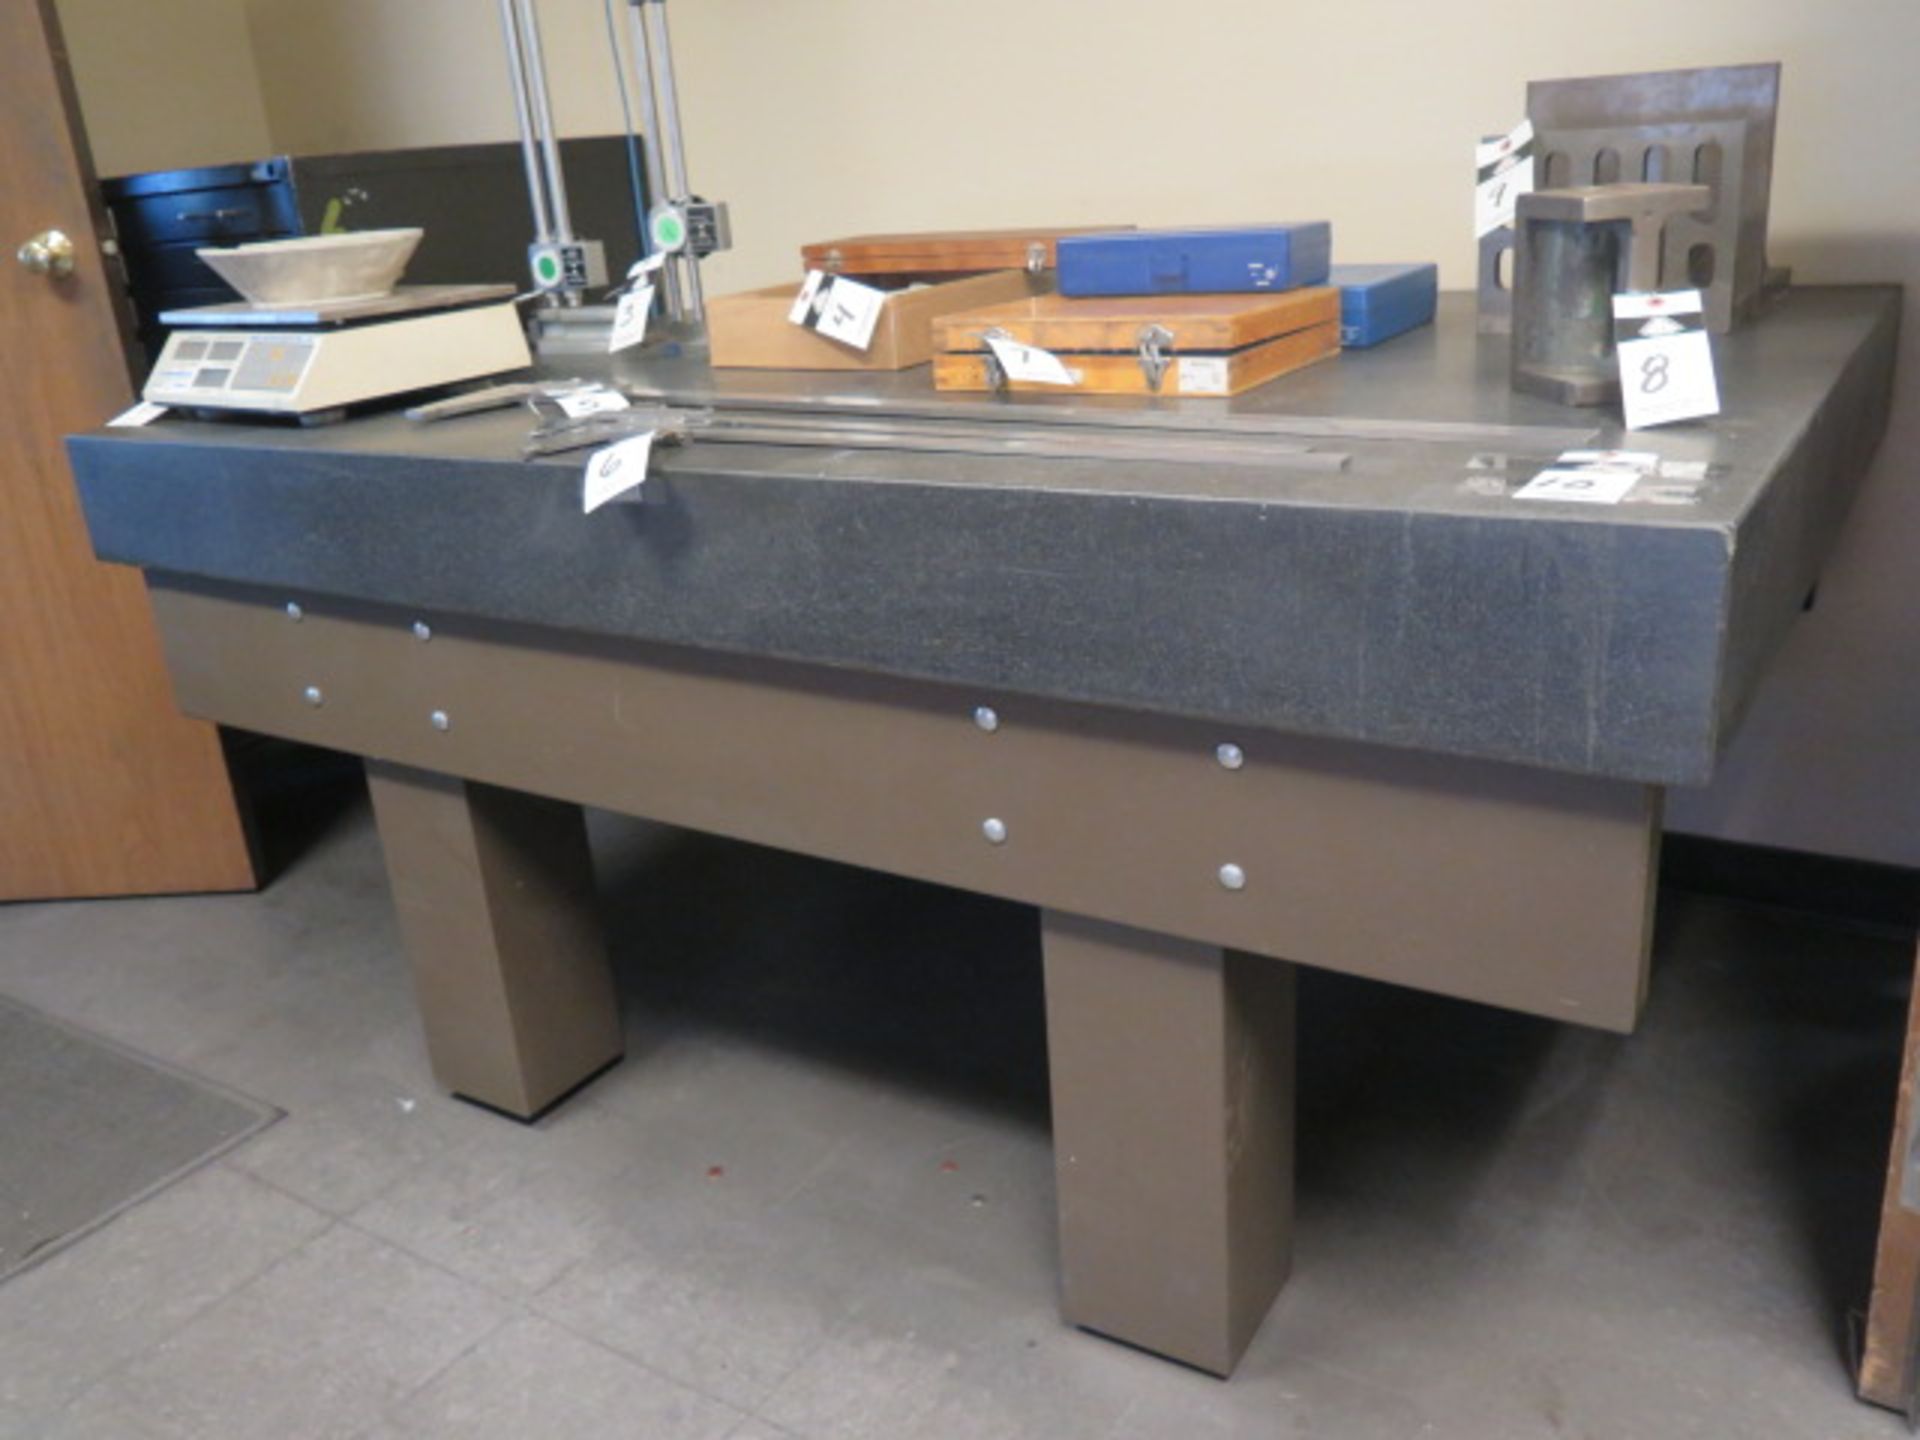 48” x 72” x 7” Granite Surface Plate w/ Stand